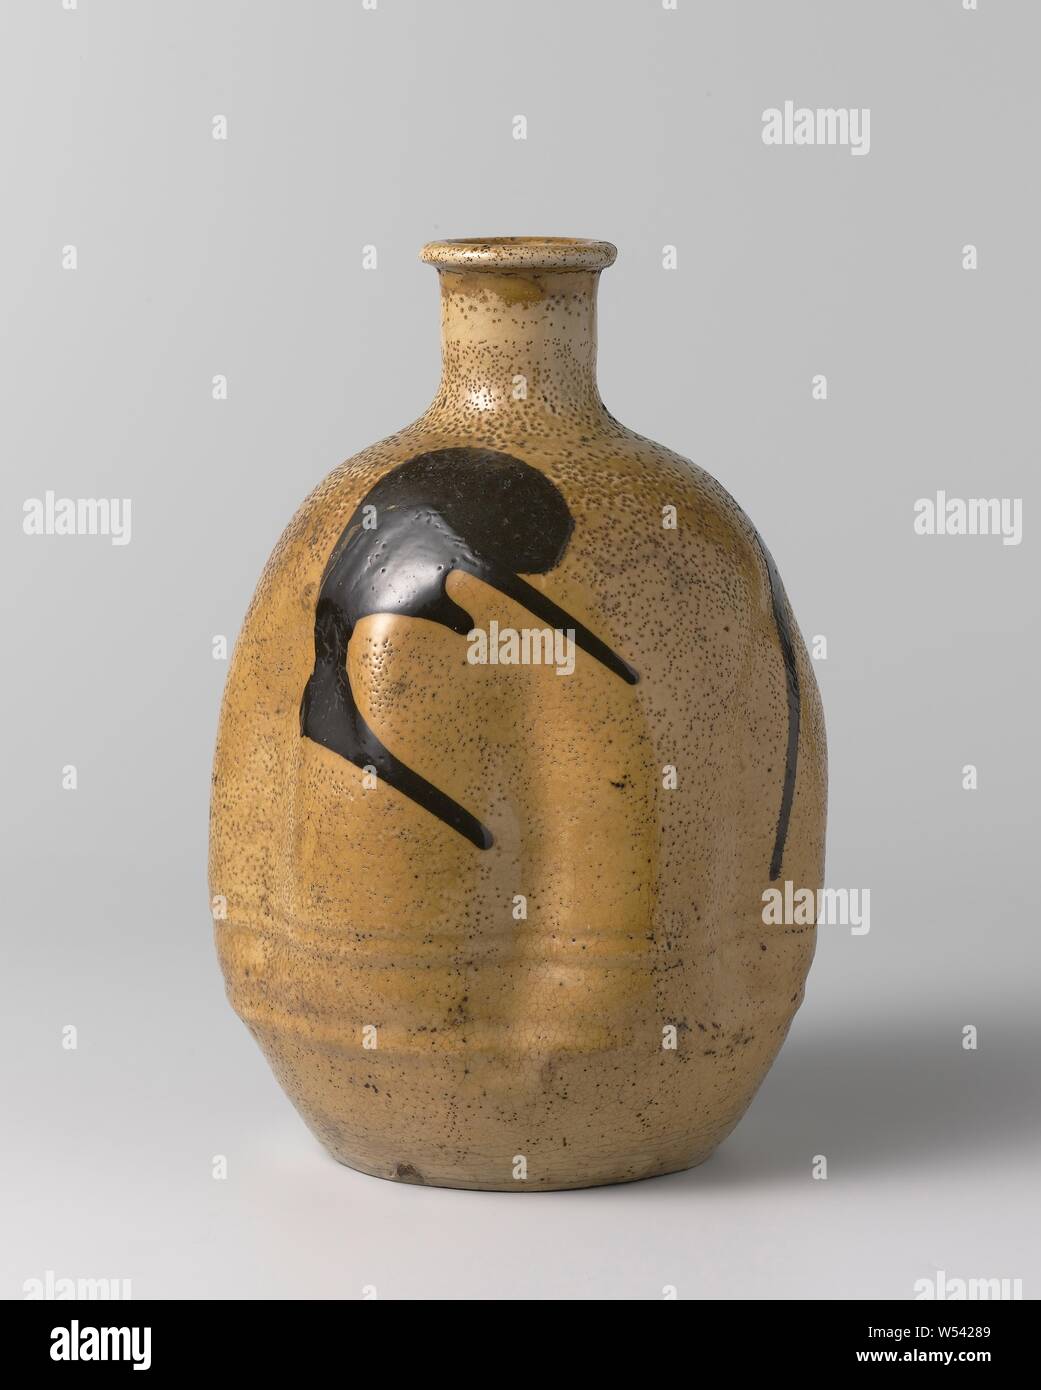 Ovoid sake bottle with a yellow glaze and brown marks, Egg shaped sake bottle made of stoneware with indented walls, covered with a yellow glaze and painted in brown. Four brown spots on the belly. Old label on the bottom with 'W504'., anonymous, Japan, c. 1750 - c. 1850, Edo-period (1600-1868), stoneware, glaze, vitrification, h 21.2 cm d 4.5 cm d 14.8 cm d 9 cm Stock Photo